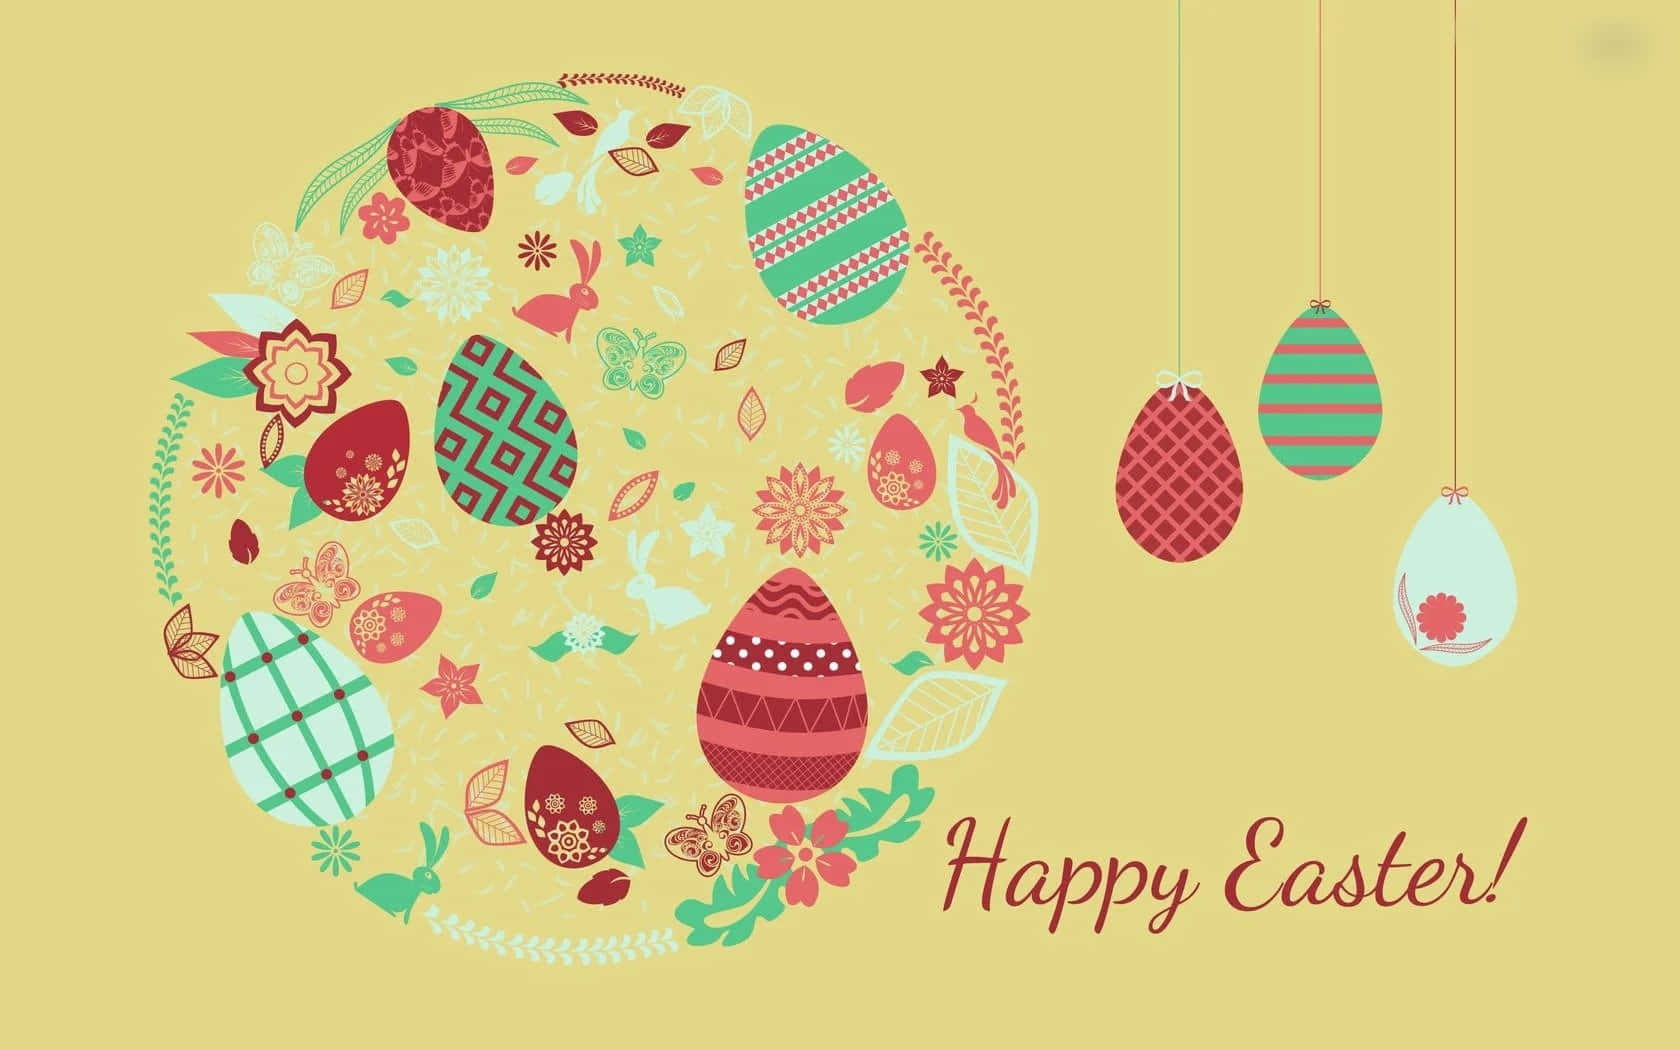 Celebrate Easter with Joy and Love